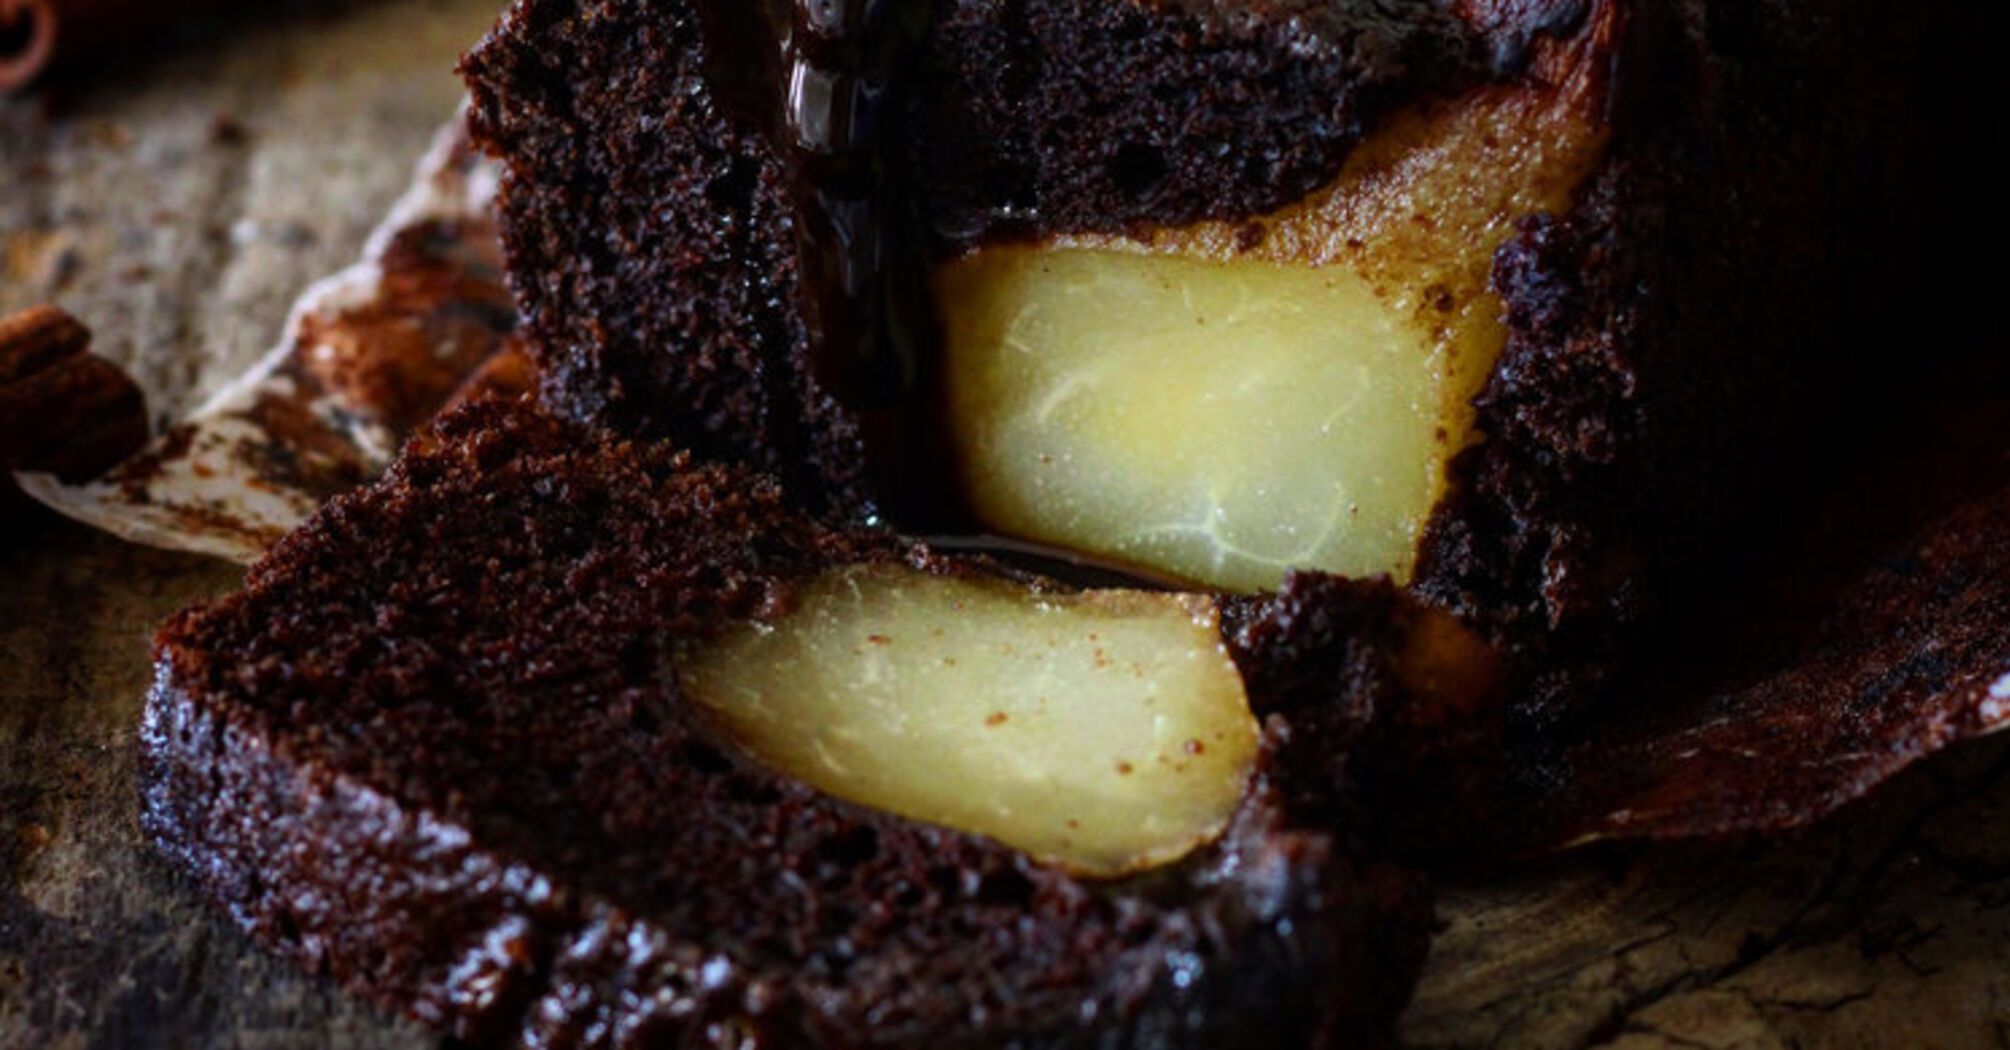 What a delicious dessert to make with pears: chocolate is needed